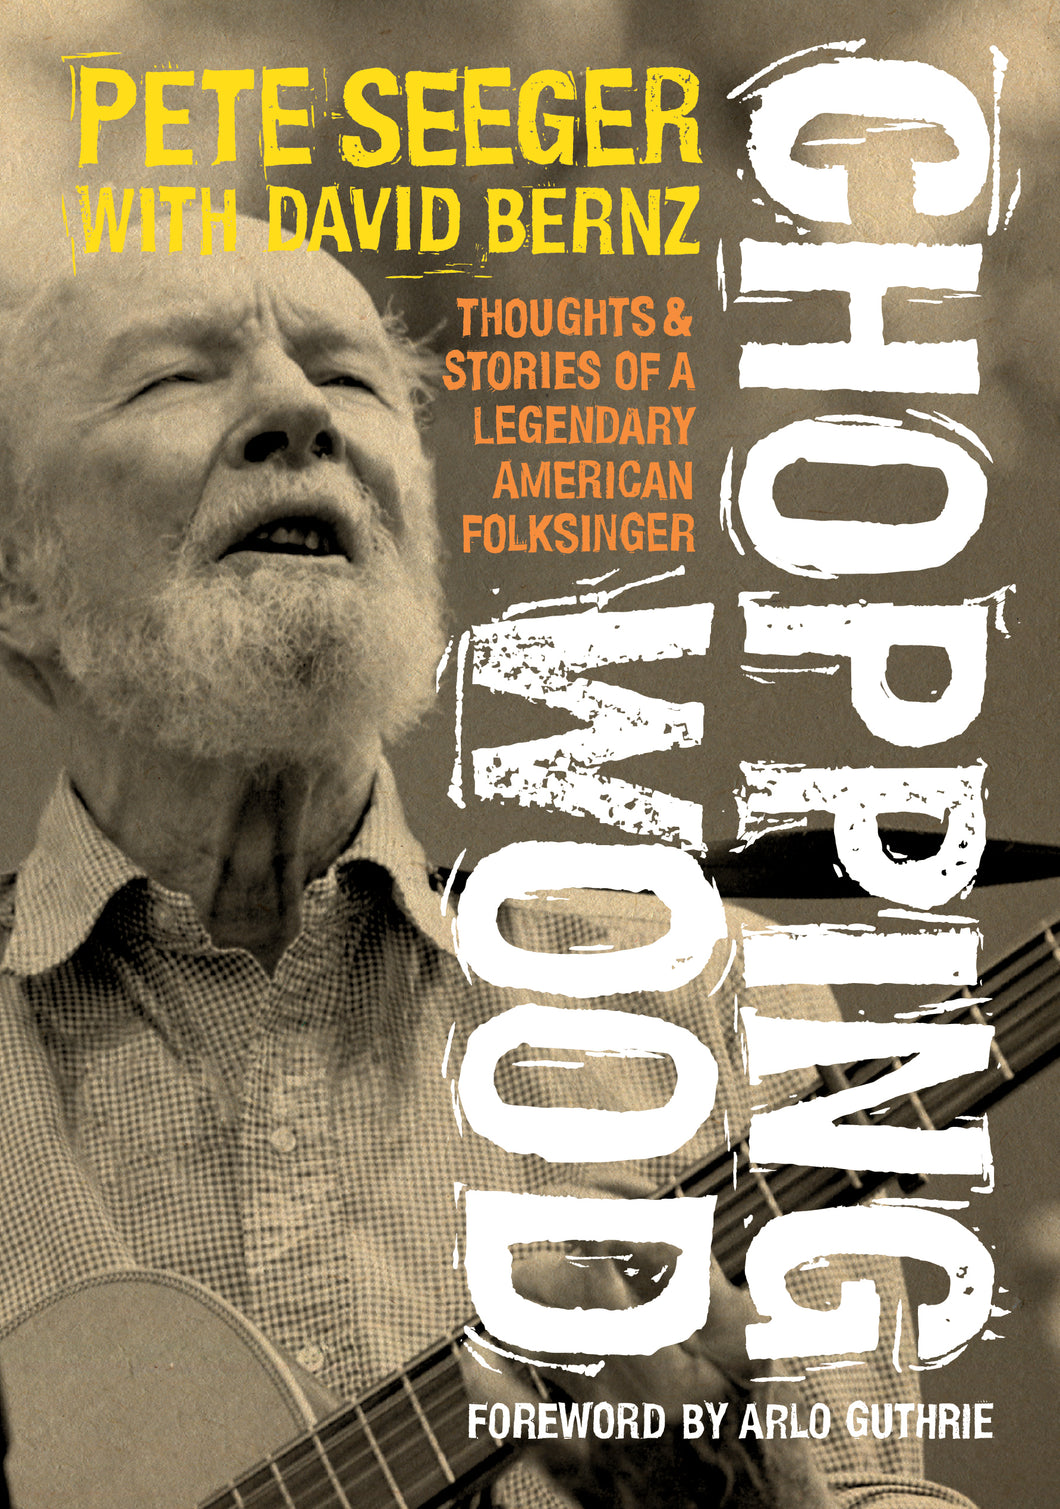 Chopping Wood: Thoughts & Stories of a Legendary American Folksinger (Pete Seeger with David Bernz)